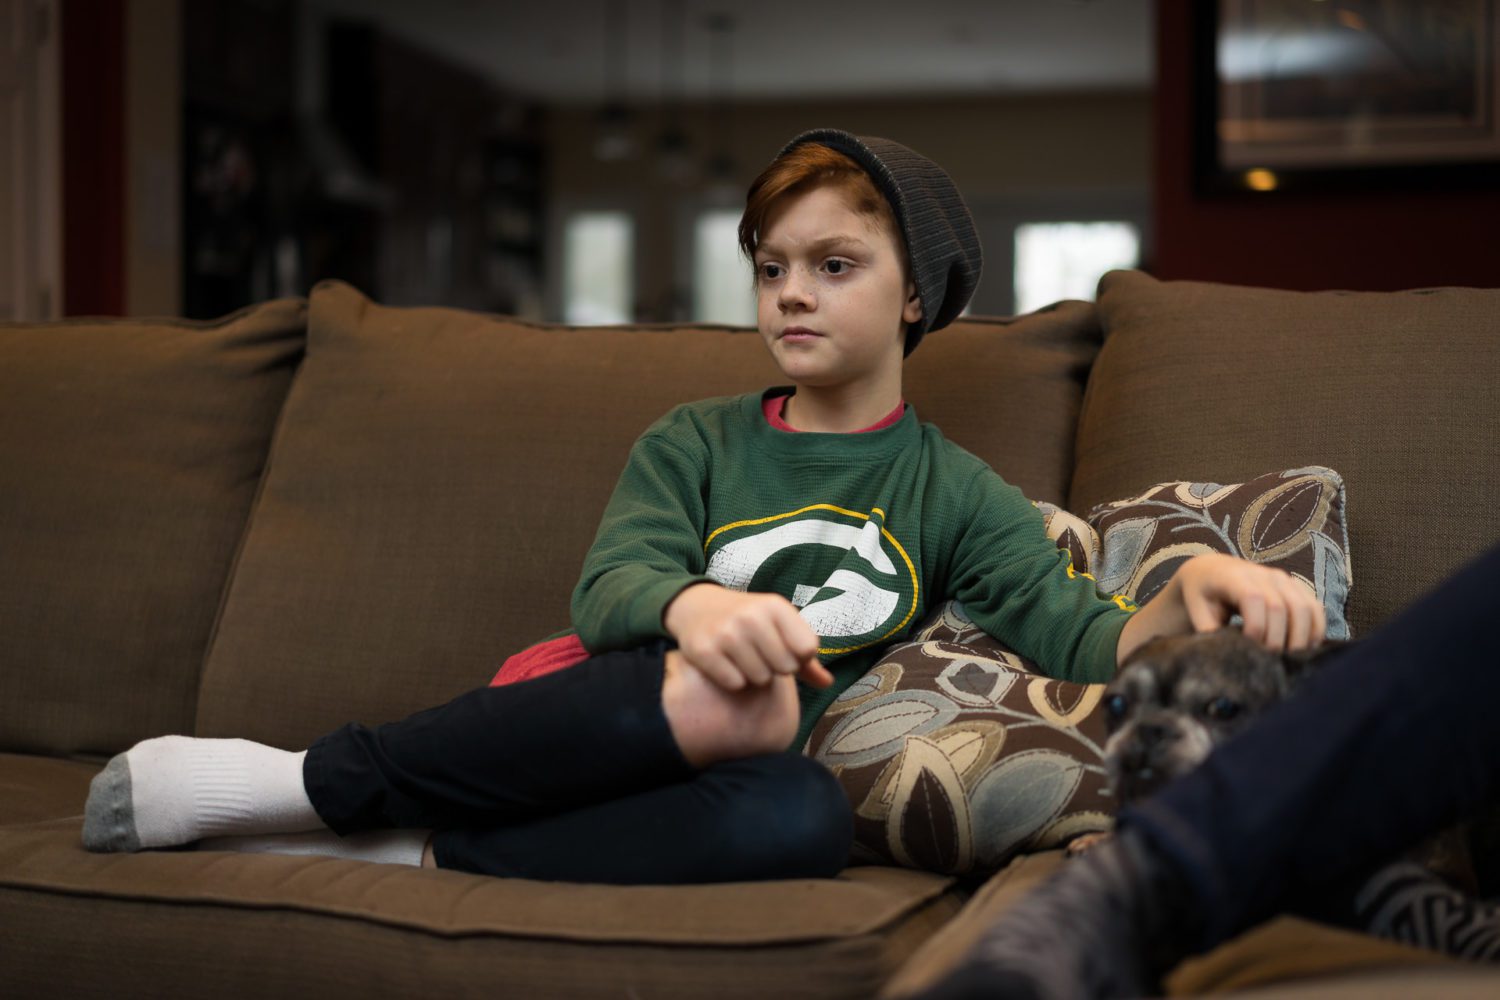 family coping with childhood leukemia: Faces of Health Care